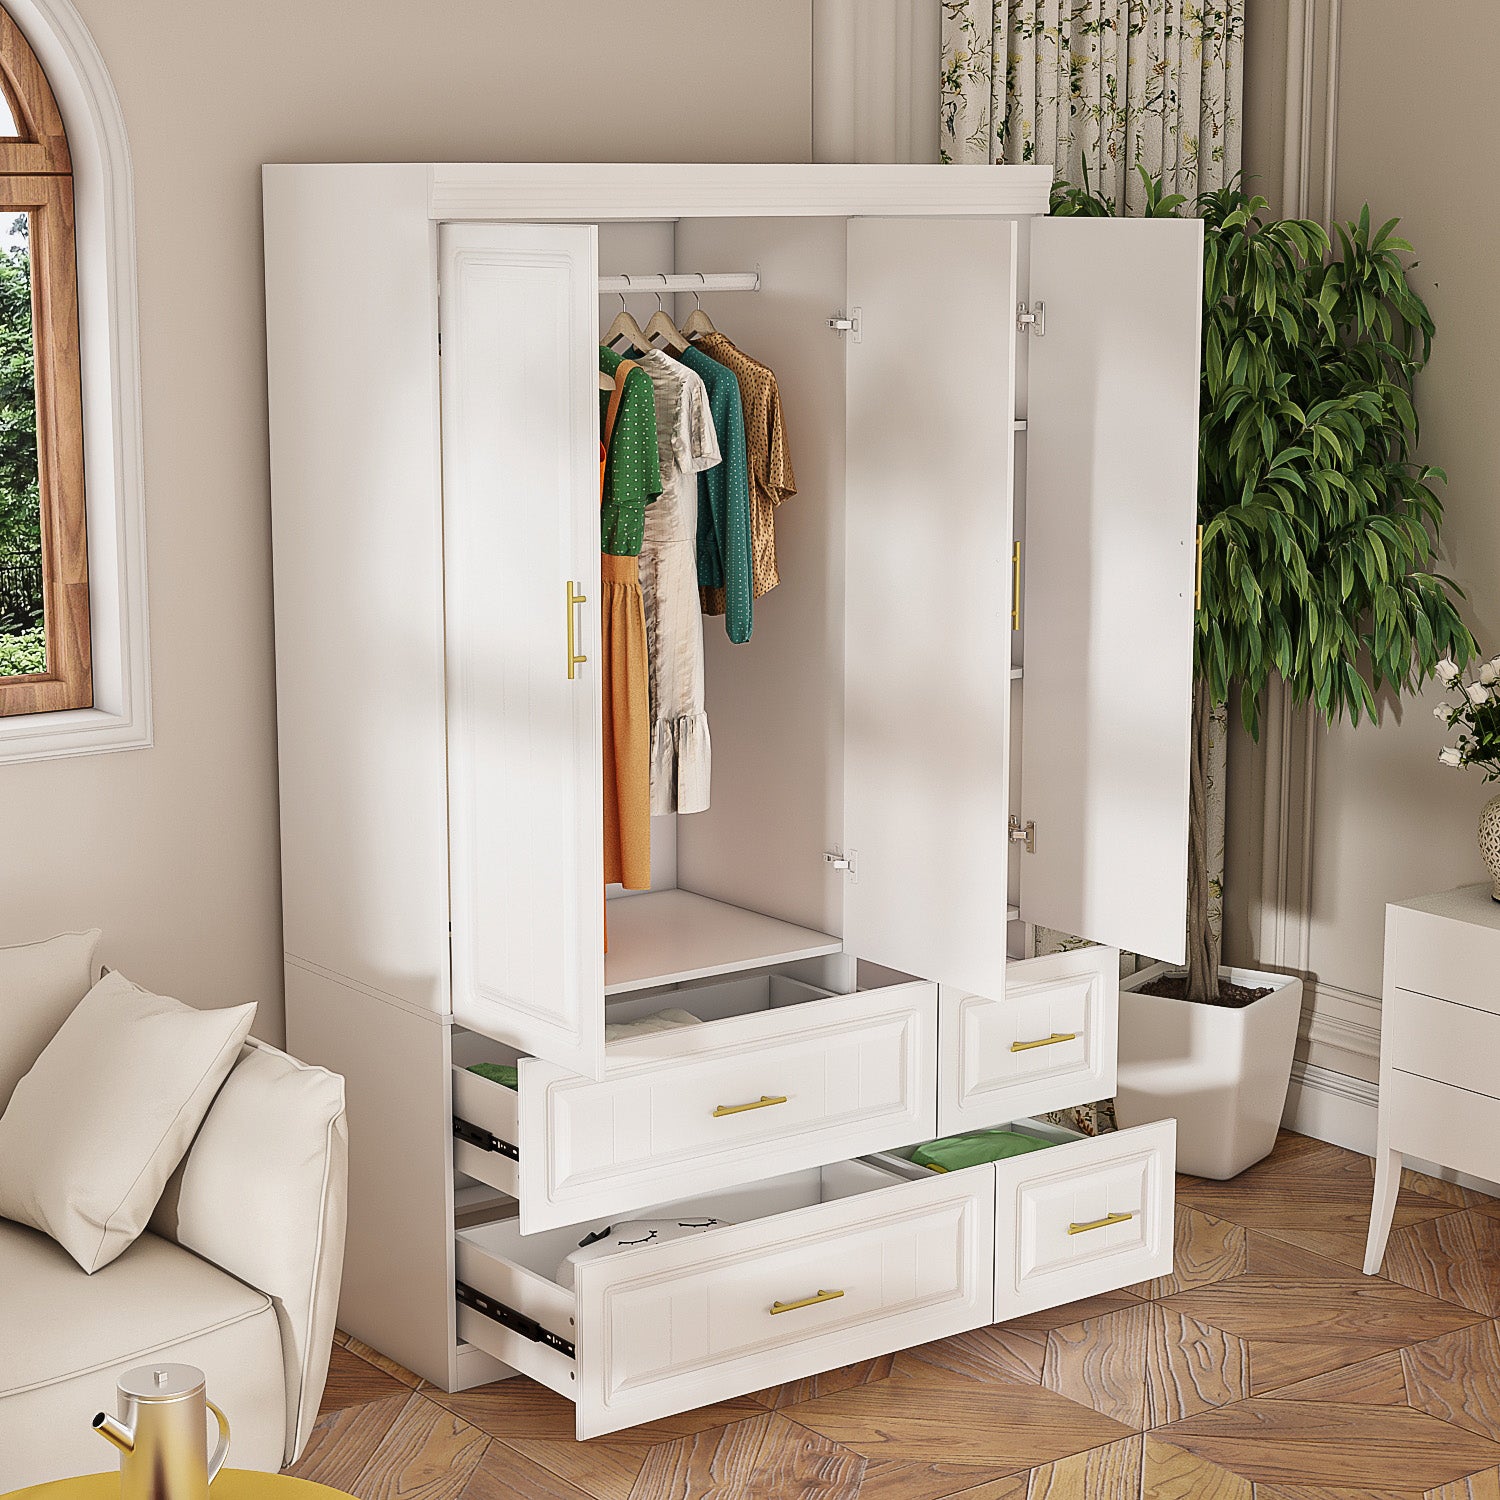 Wardrobe Heavy Duty Clothes Closet Storage Cabinet Armoire with Metal Handles for Small Living